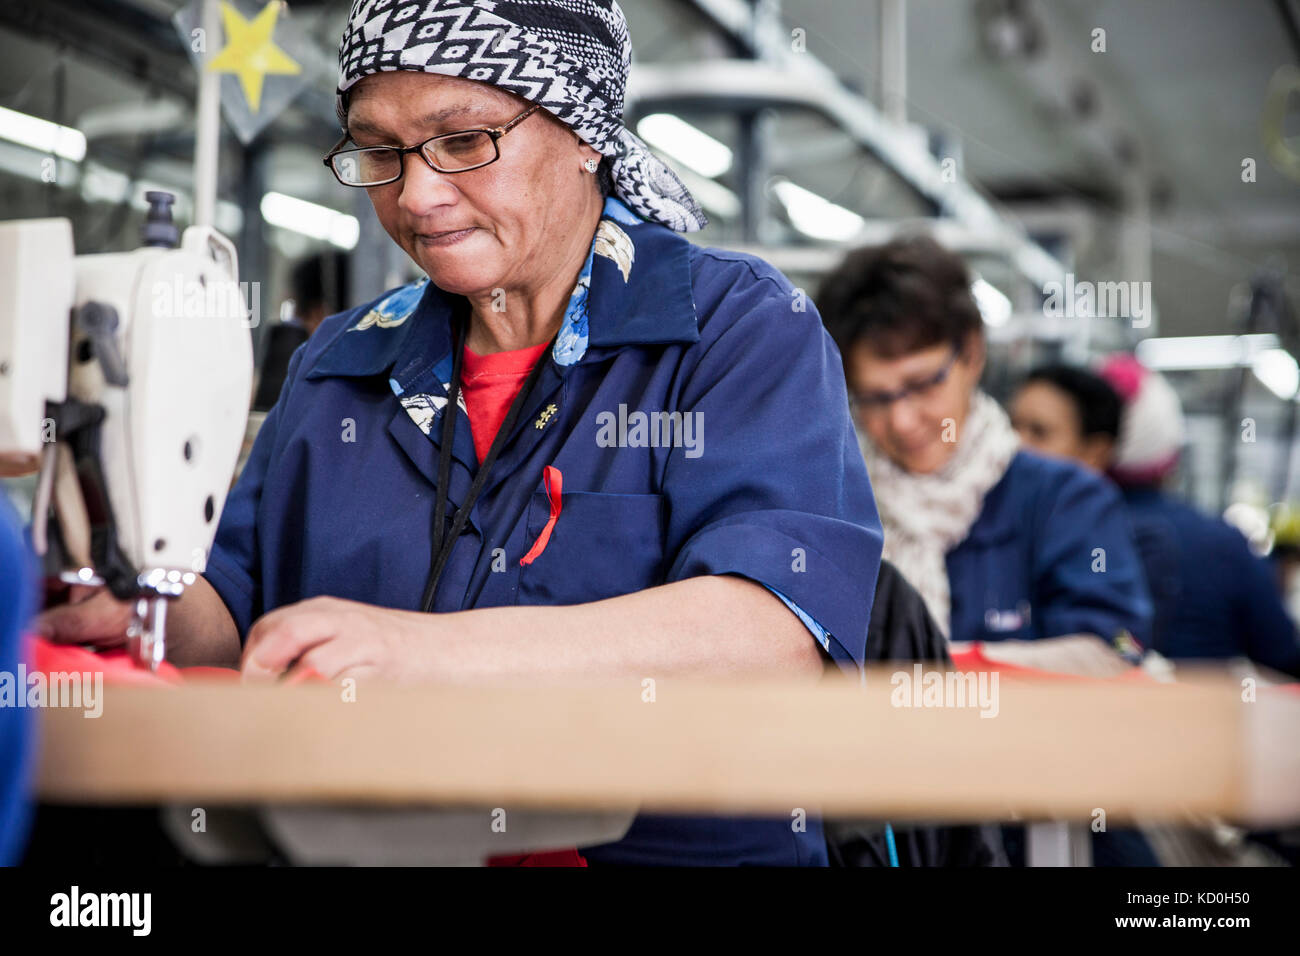 Seamstresses working in factory, Cape Town, South Africa Stock Photo